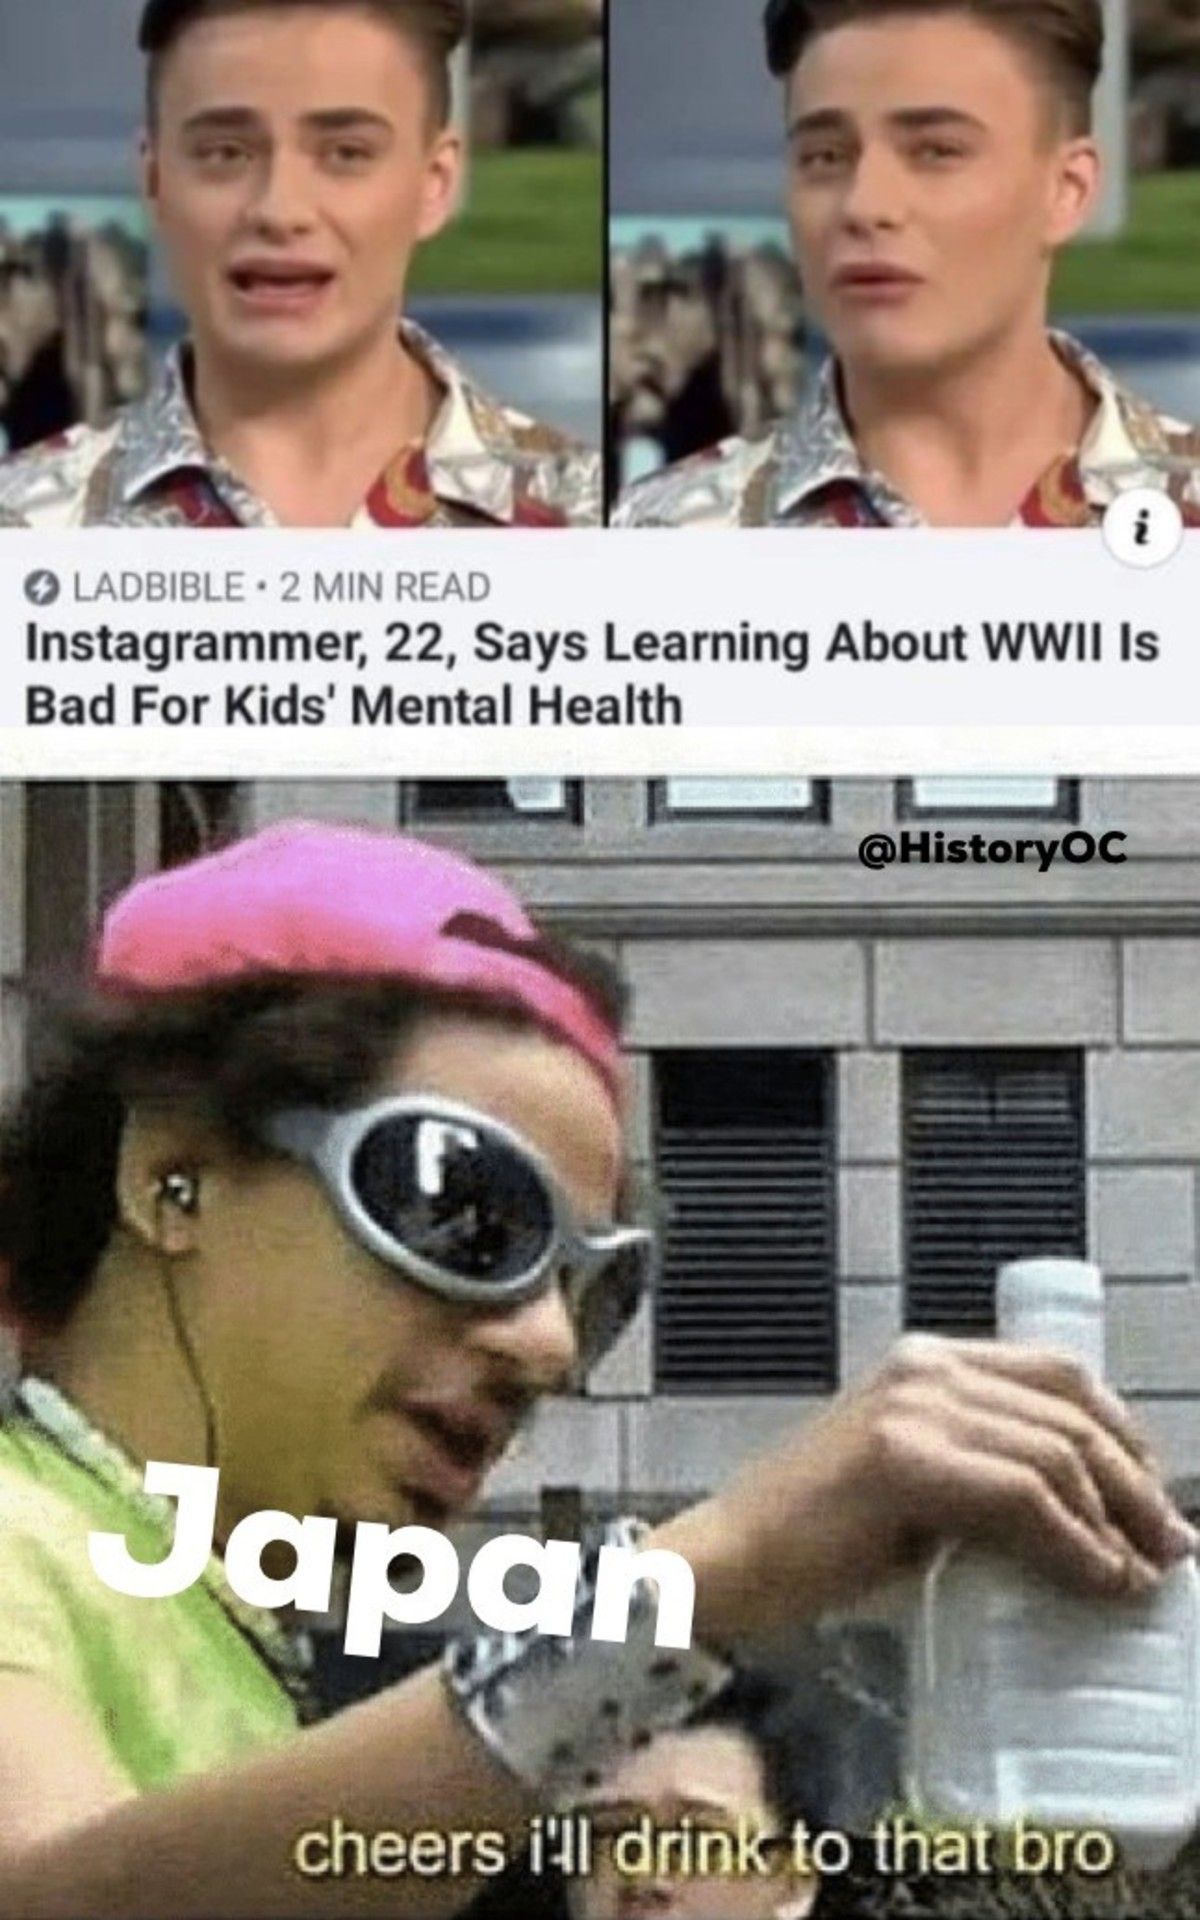 why do we have ww1 and ww3 but not ww2